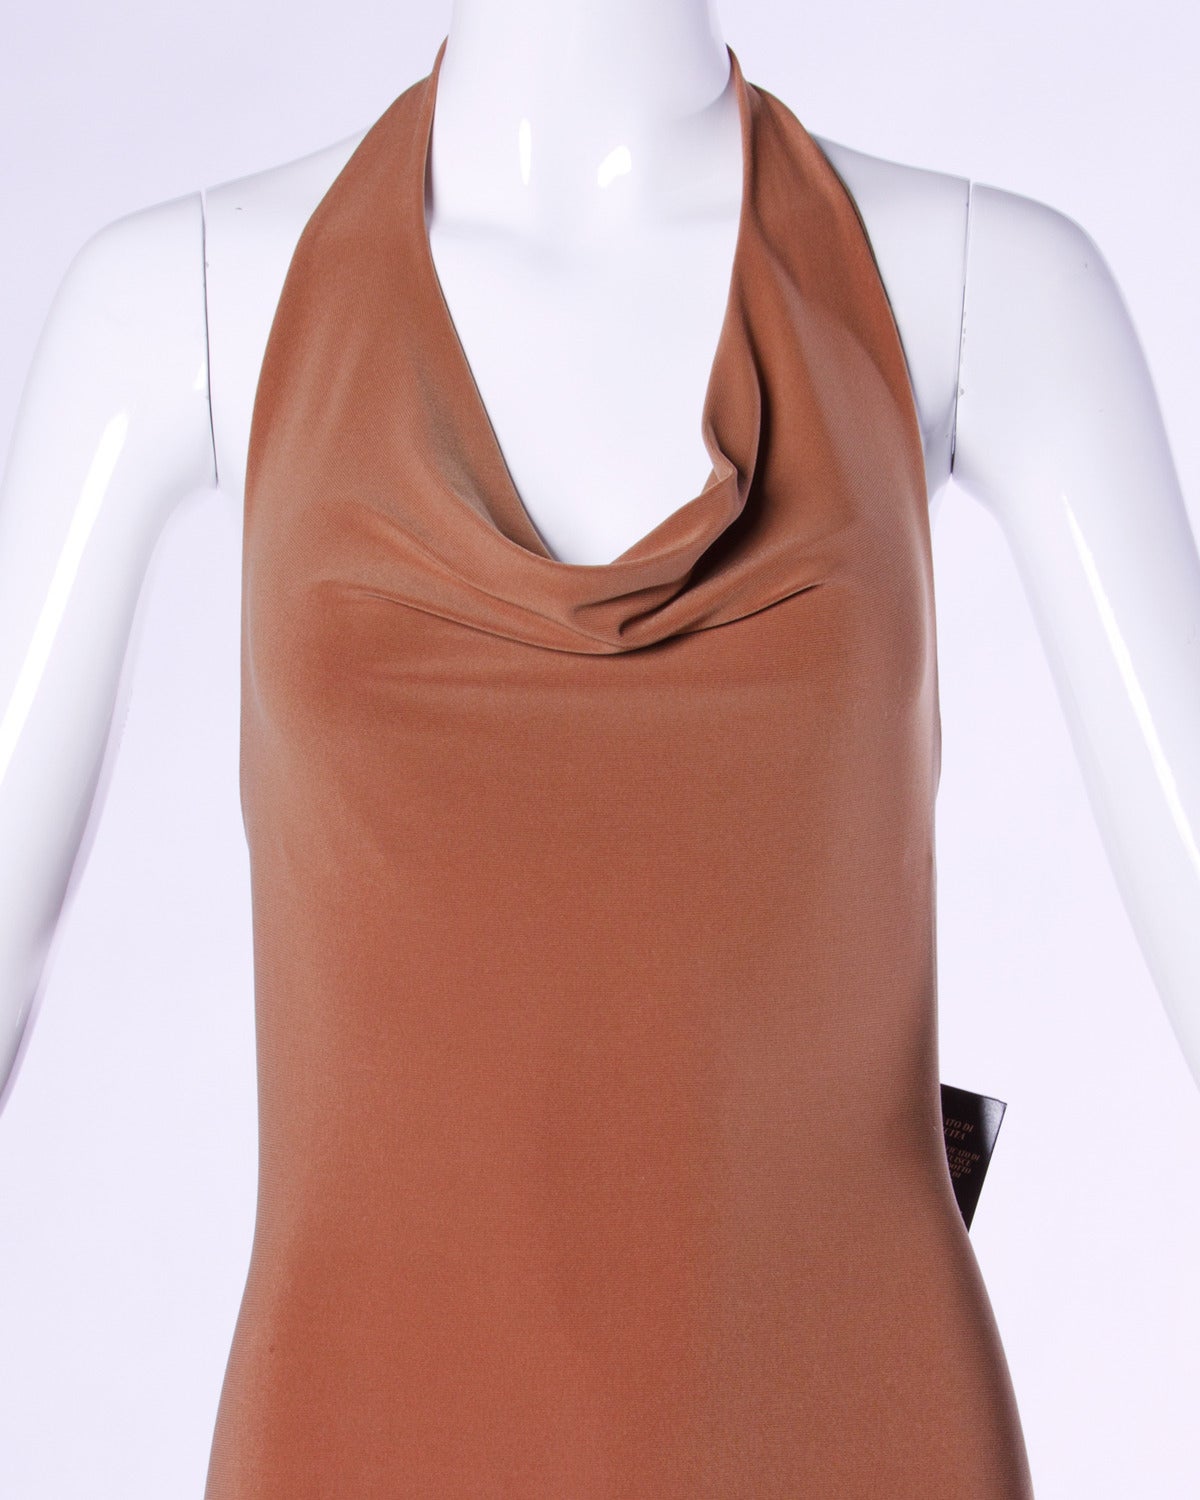 Unworn with the original tags still attached! Deadstock jersey knit halter dress by Prada.

Details:

Unlined
No Closure/ Fabric Contains Stretch
Circa: 1990's
Marked Size: L
Estimated Size: M-L
Color: Dark Tan
Fabric: Cotton/